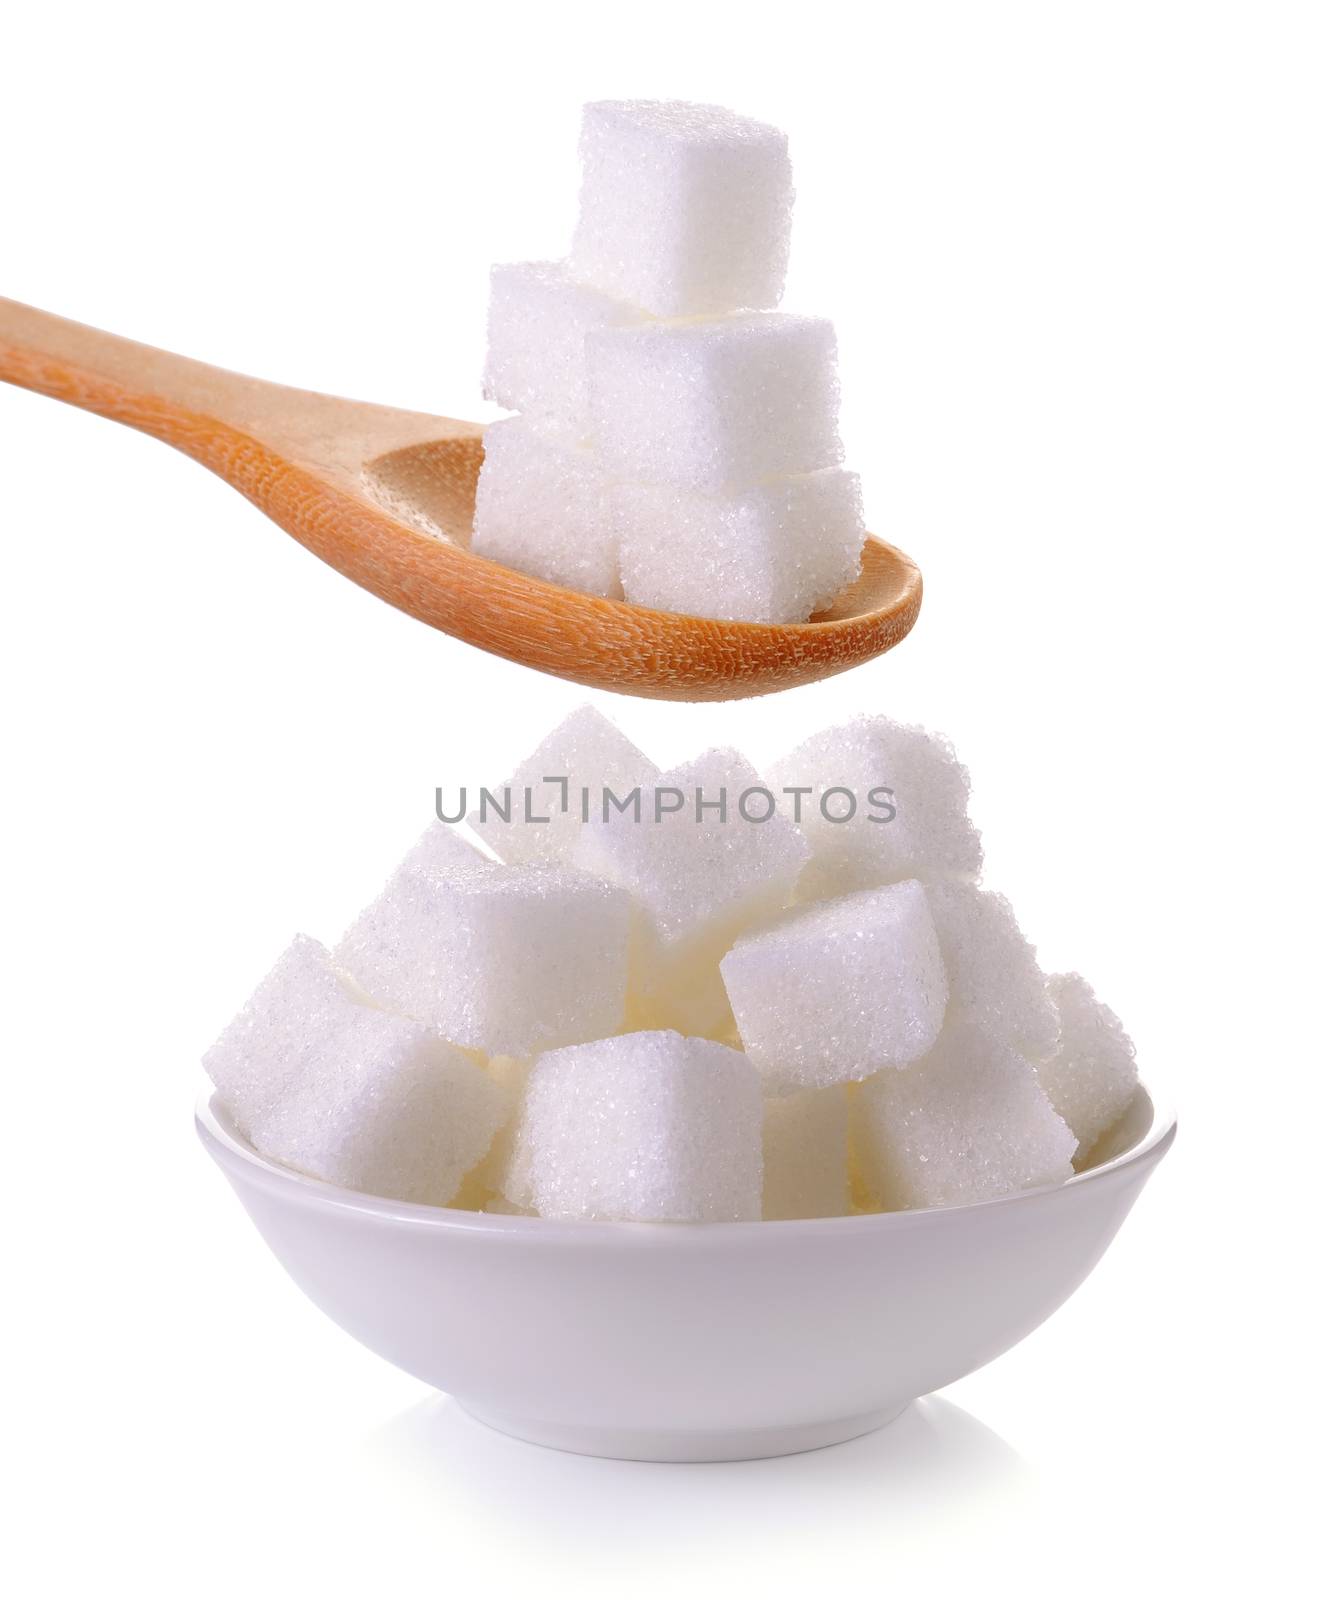 sugar cube in the spoon and bowl on white background by sommai